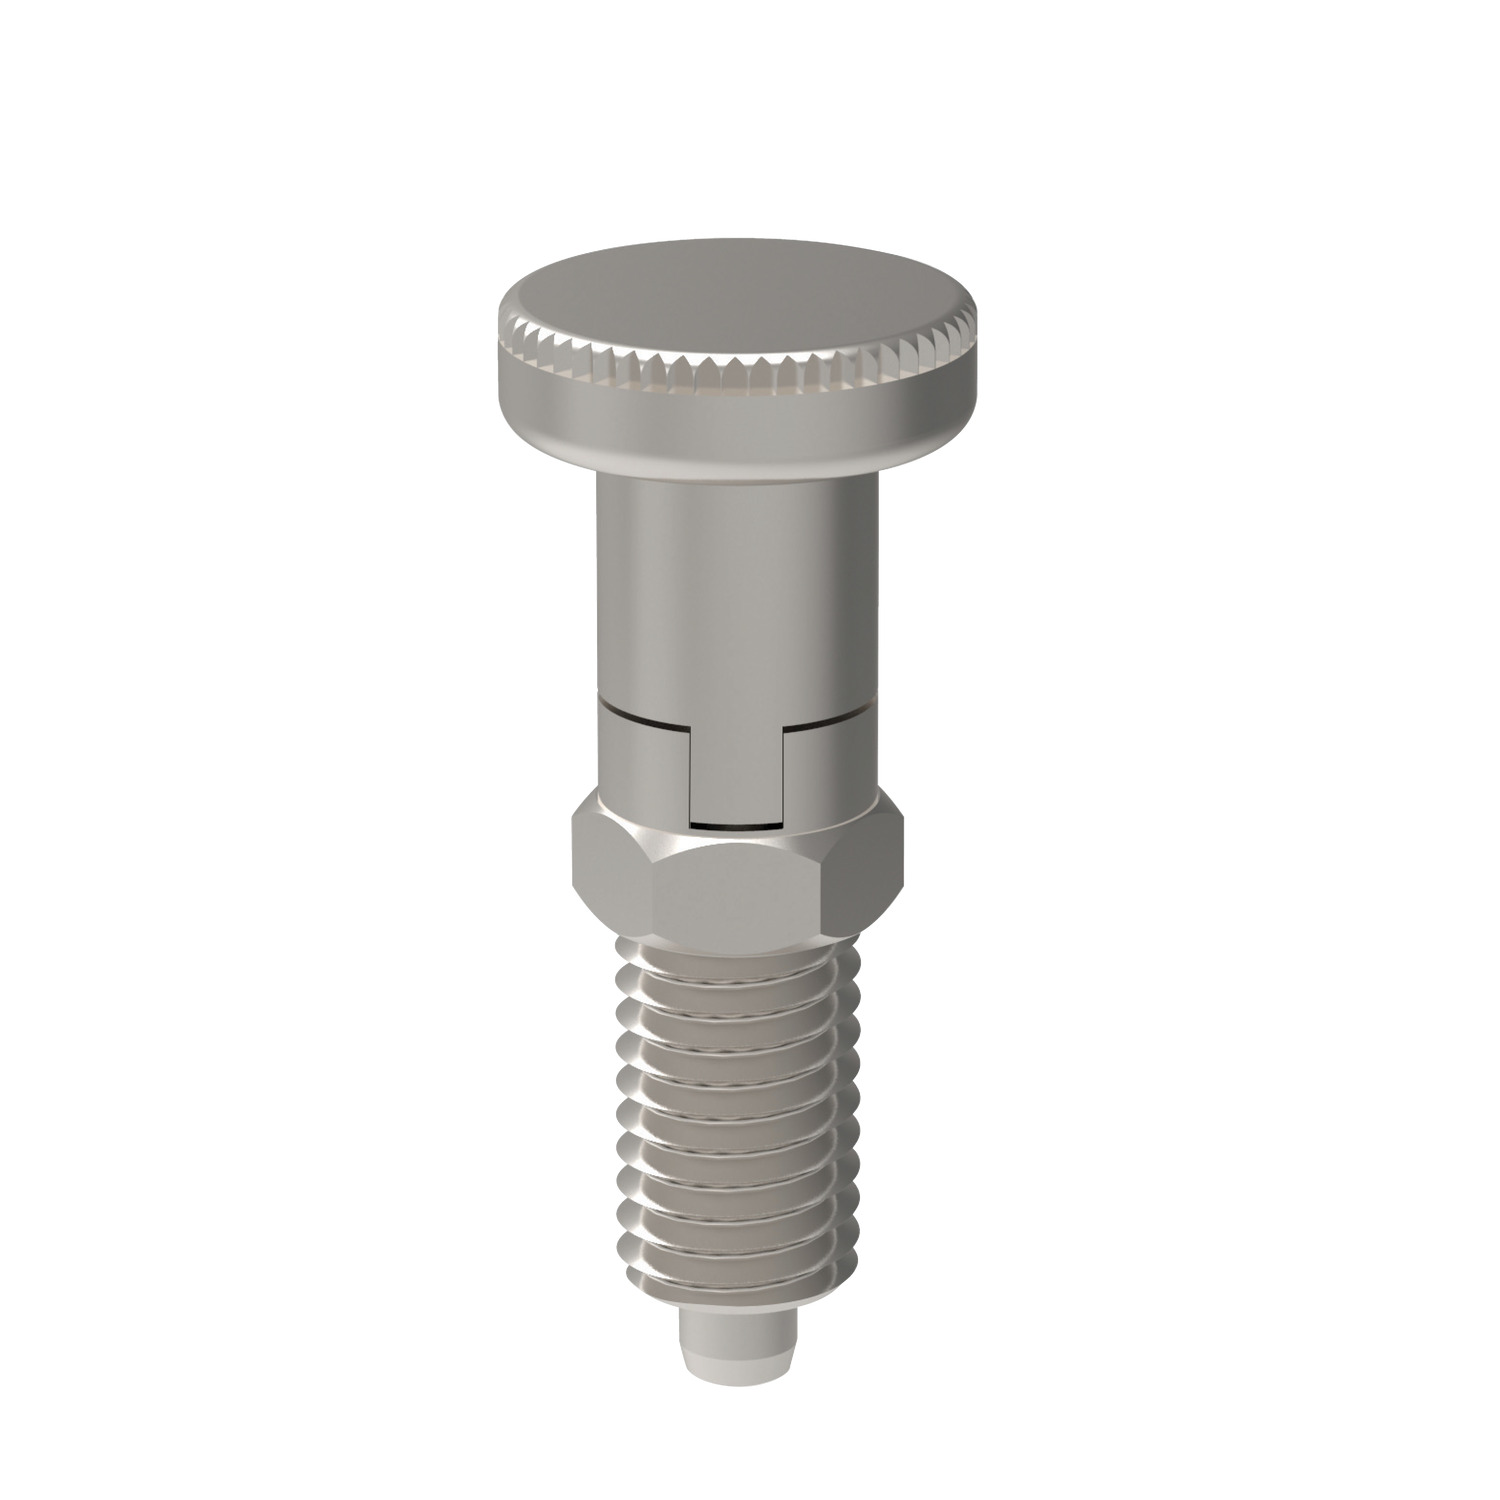 Index Plunger - Pull Grip Complete stainless steel construction designed with specific demands of food processing, pharmaceutical and water treatment industries in mind. This specific range comes with a locking 